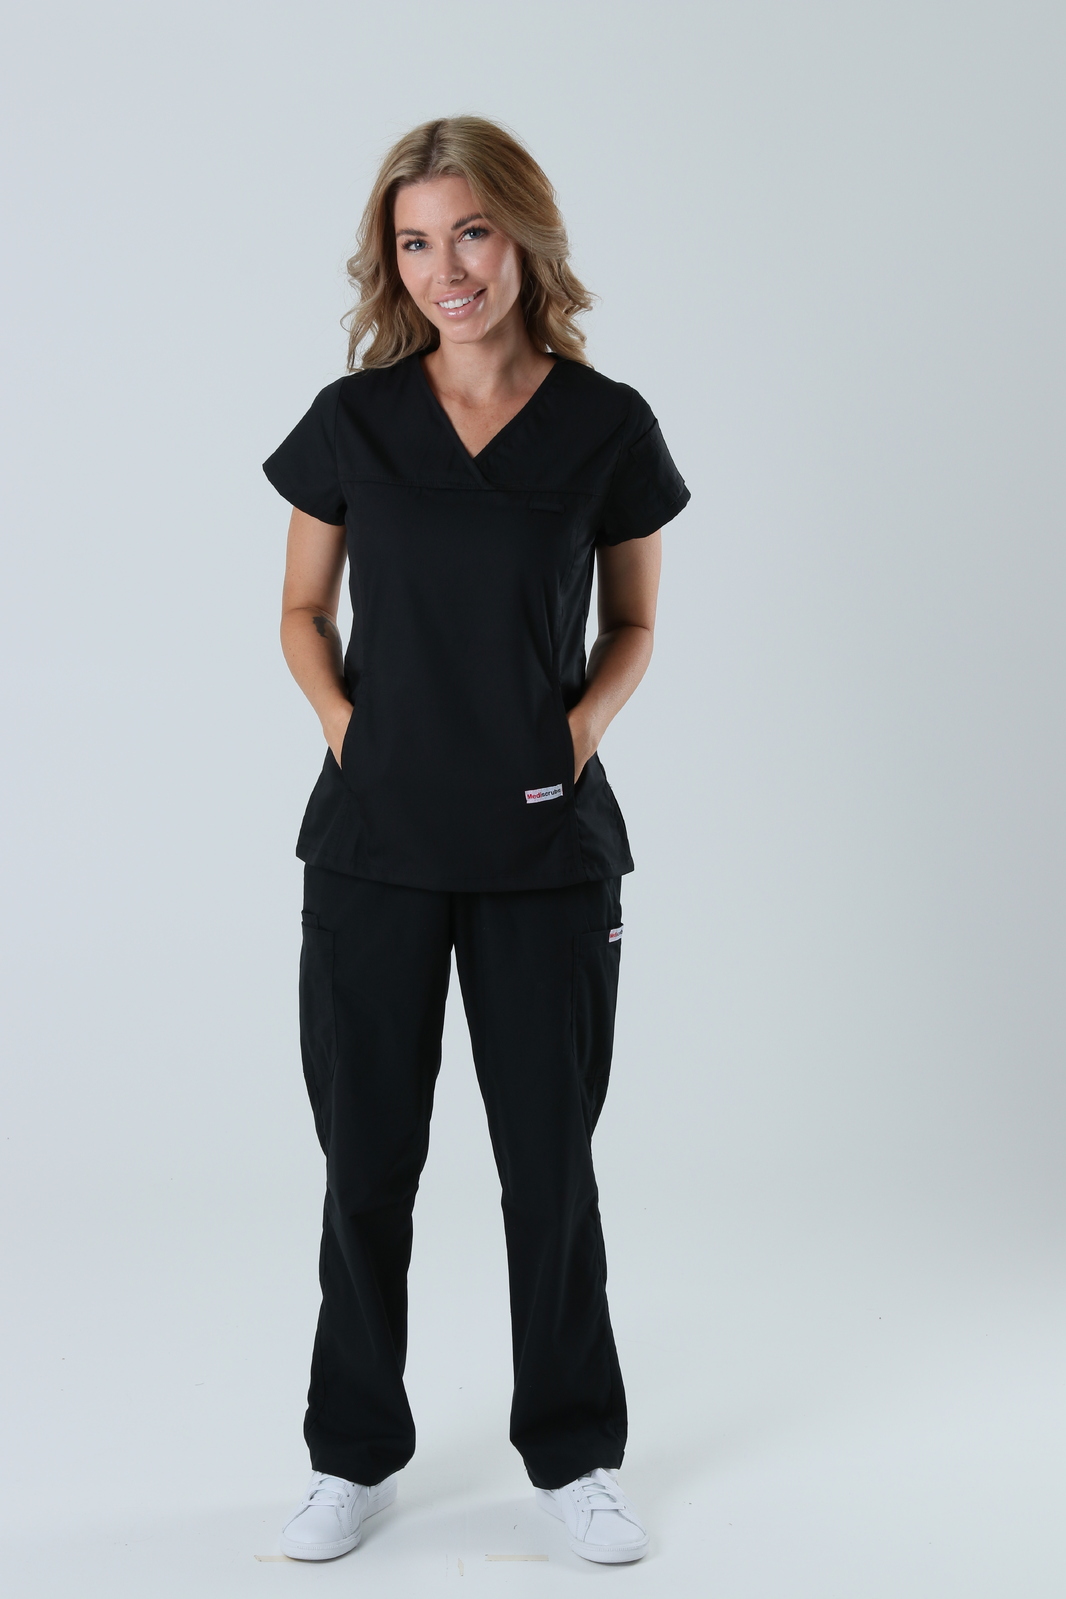 Mackay Hospital - Medcial Imaging (Women's Fit Solid Scrub Top and Cargo Pants in Black incl Logos)